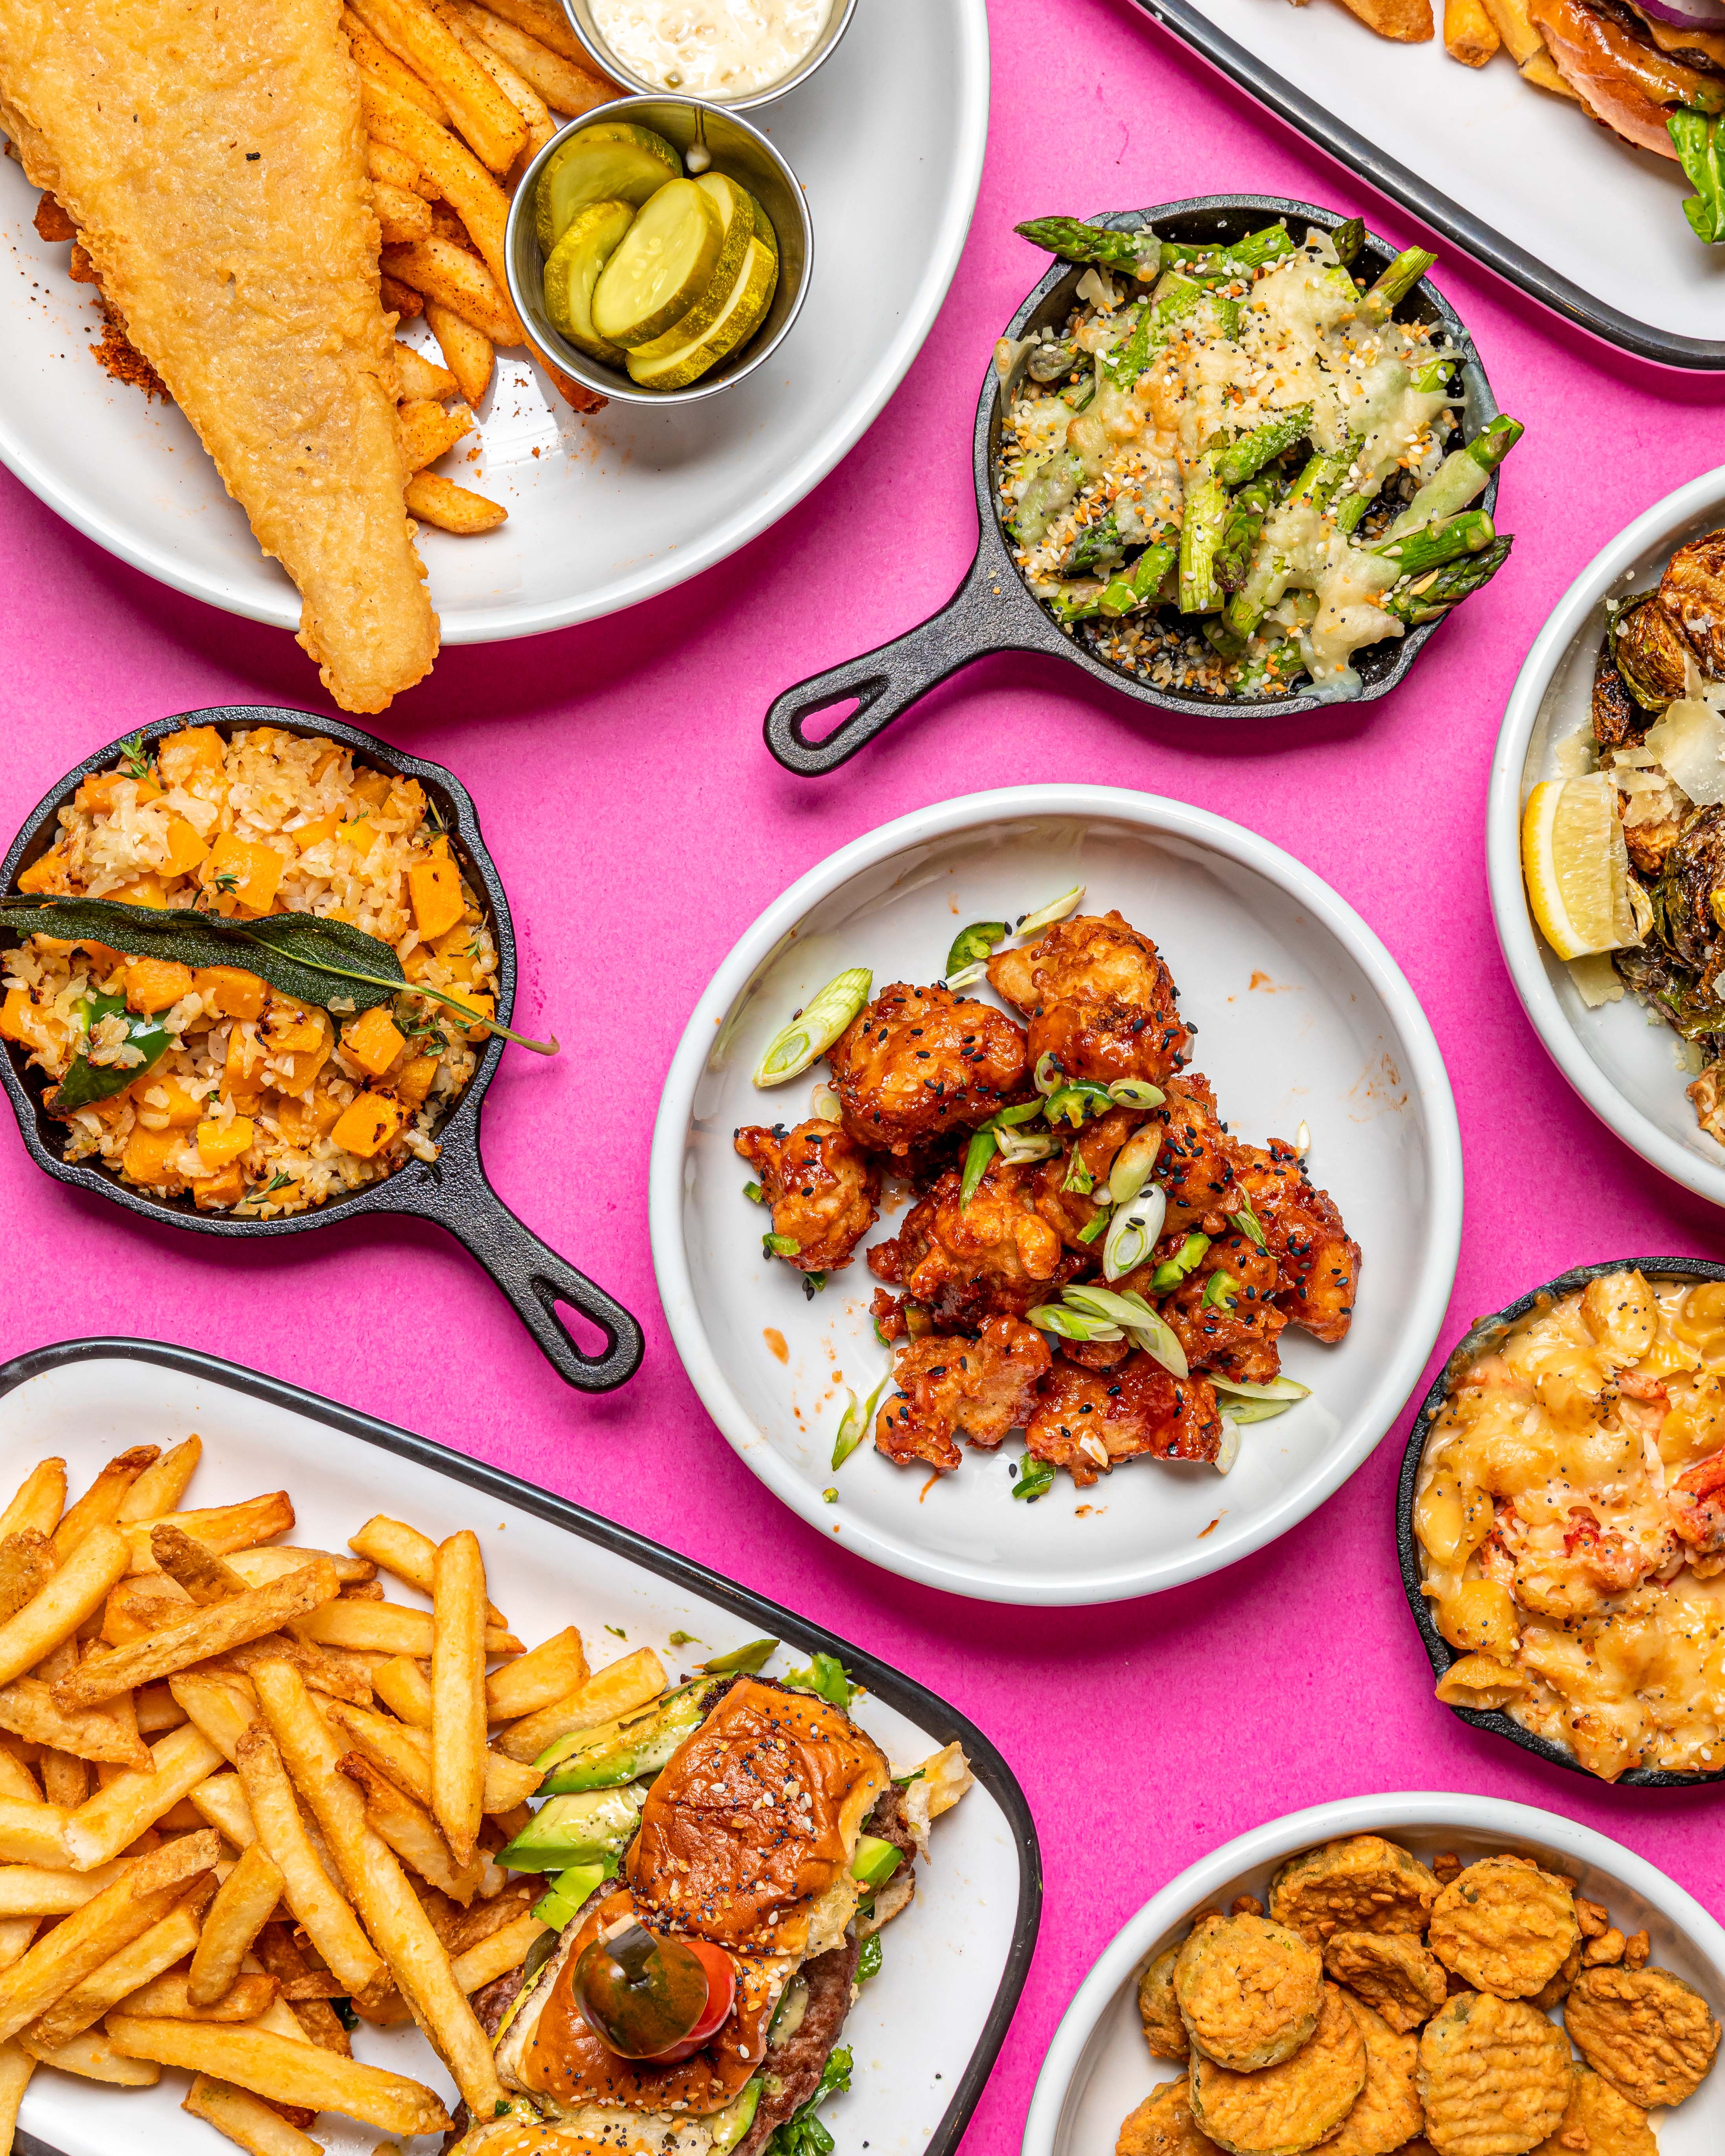 Bareburger Kitchen + Bar Launches New Menu & Cocktails in Chelsea, NYC